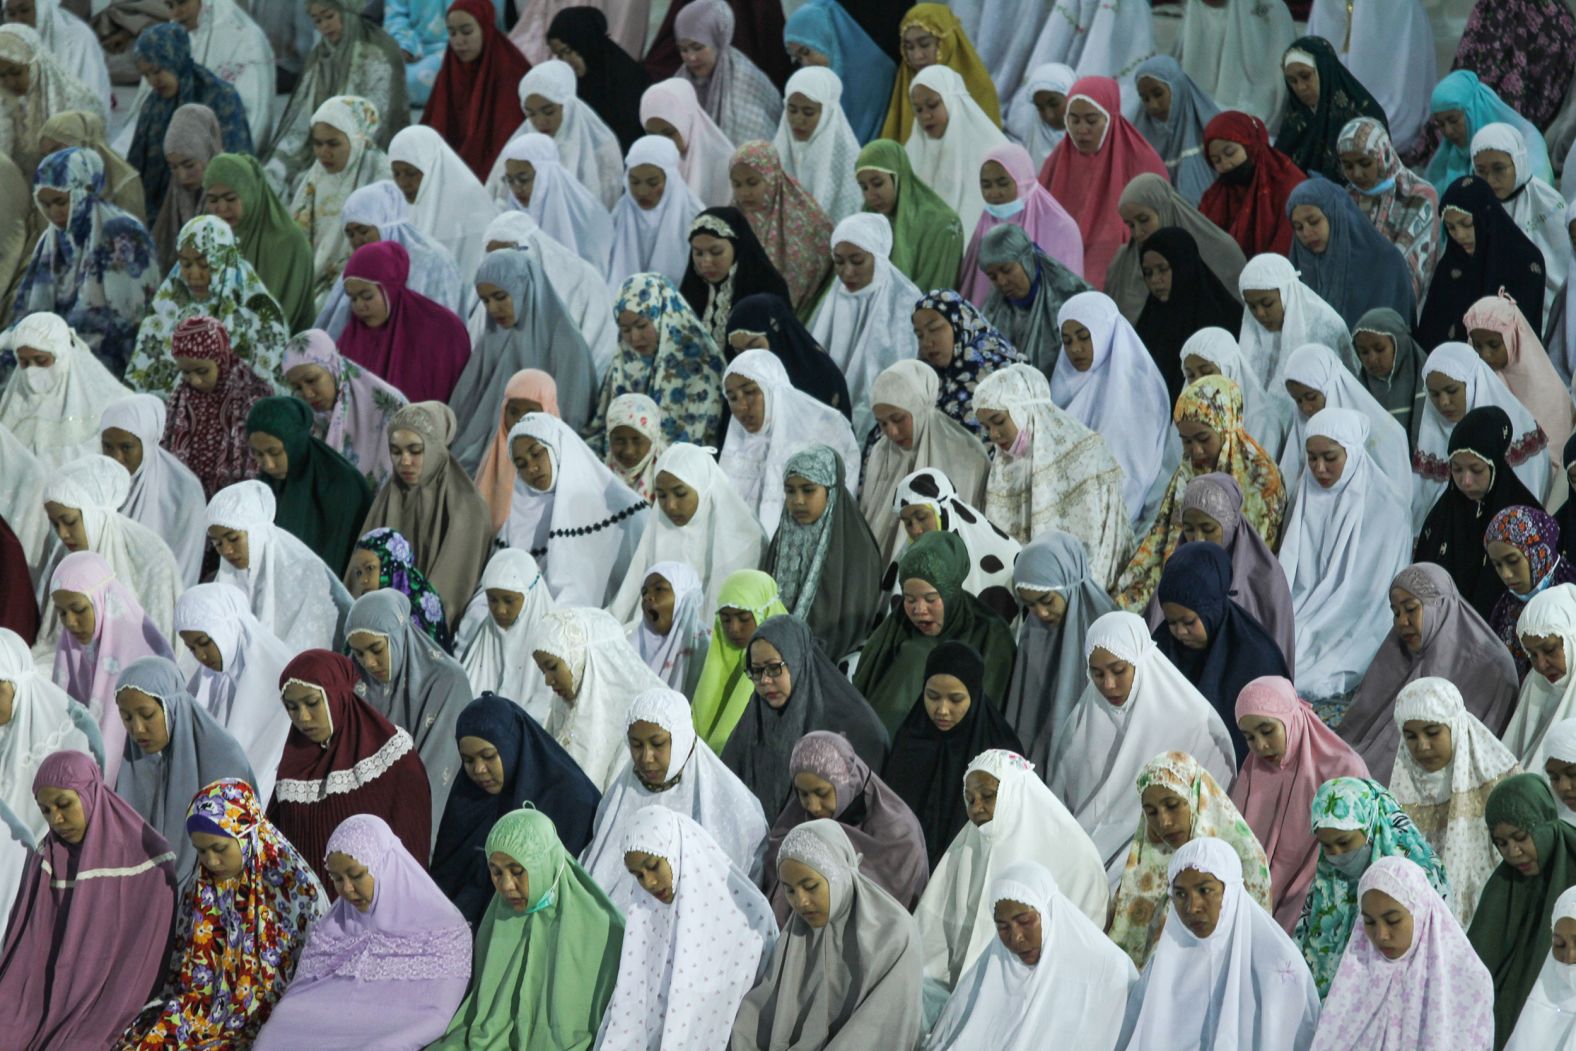 Muslims pray at a mosque in Lhokseumawe, Indonesia.